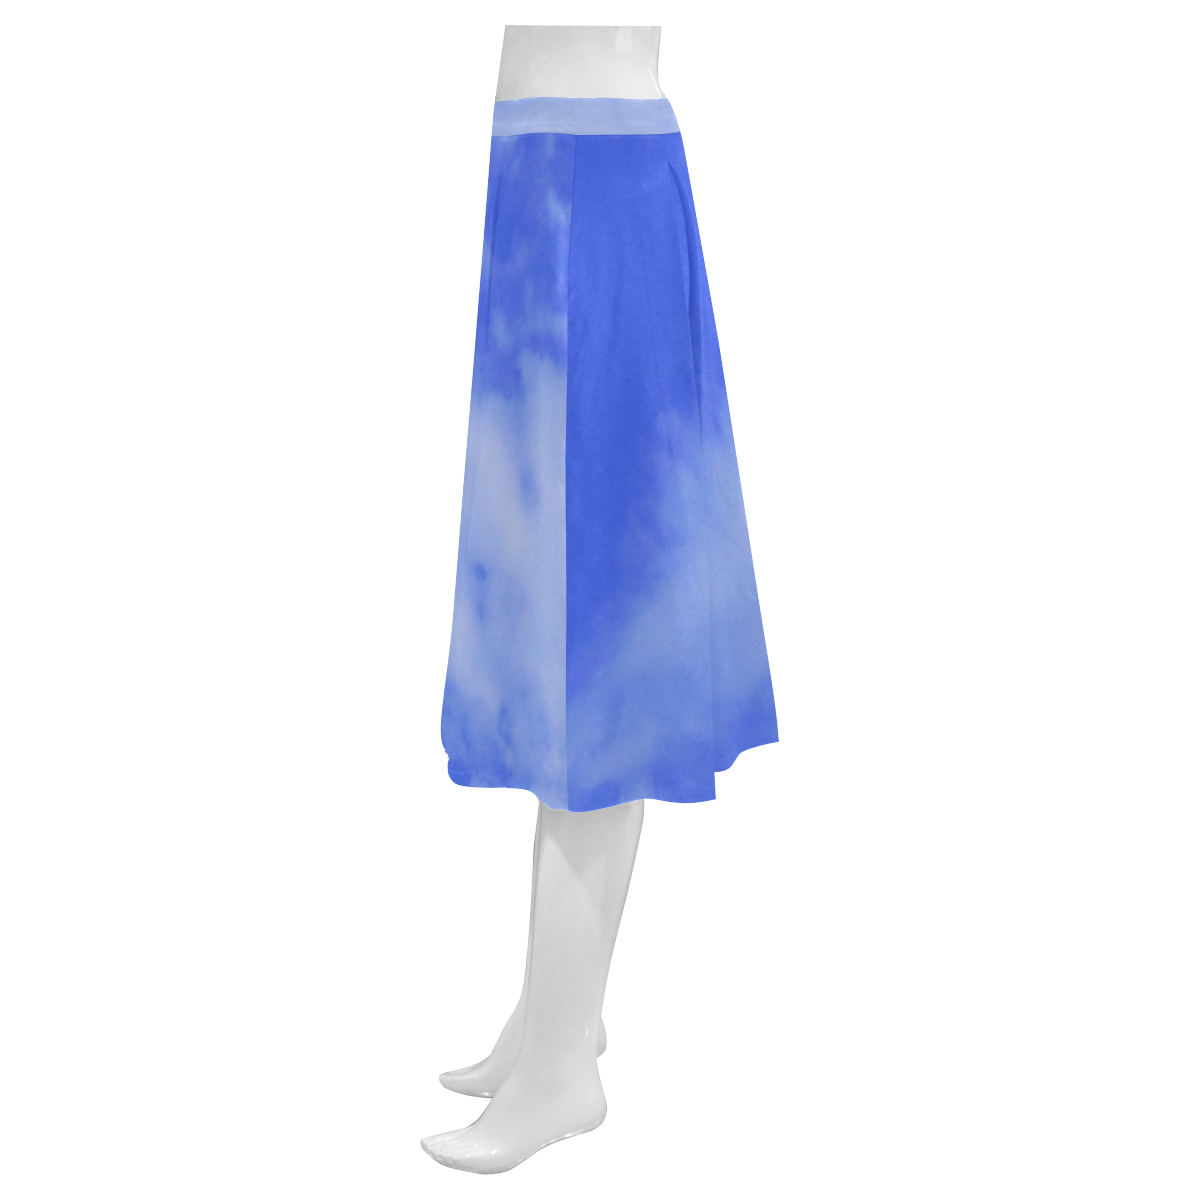 Blue Clouds Mnemosyne Women's Crepe Skirt (Model D16)